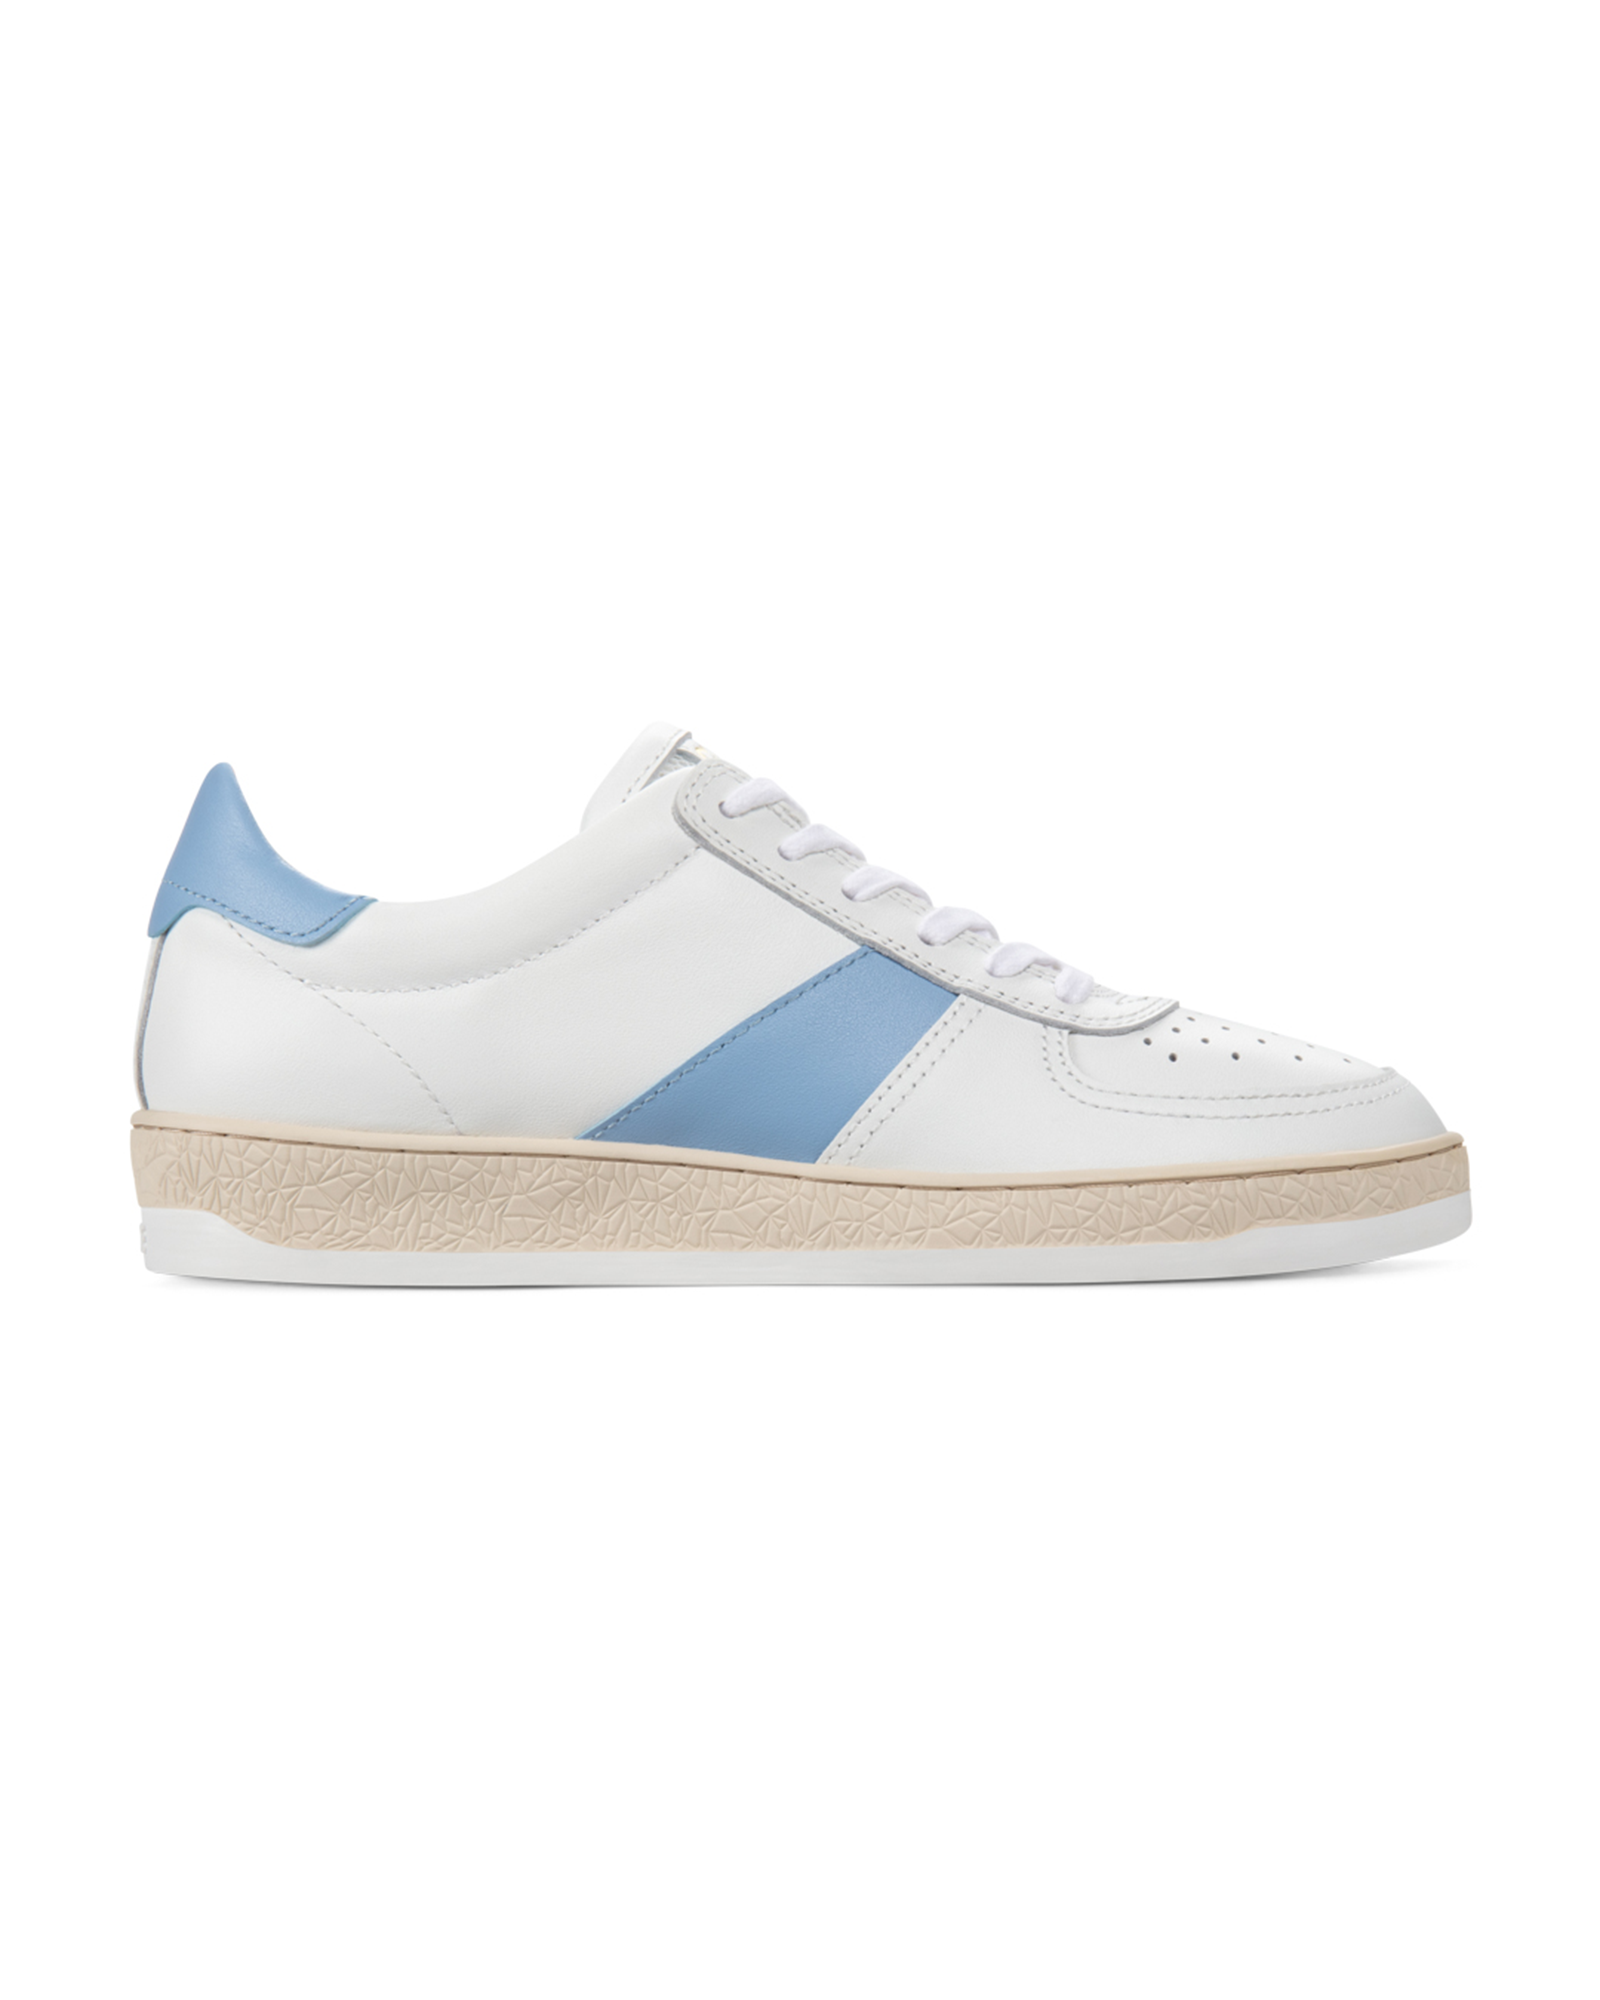 White/Pale Blue/Leather